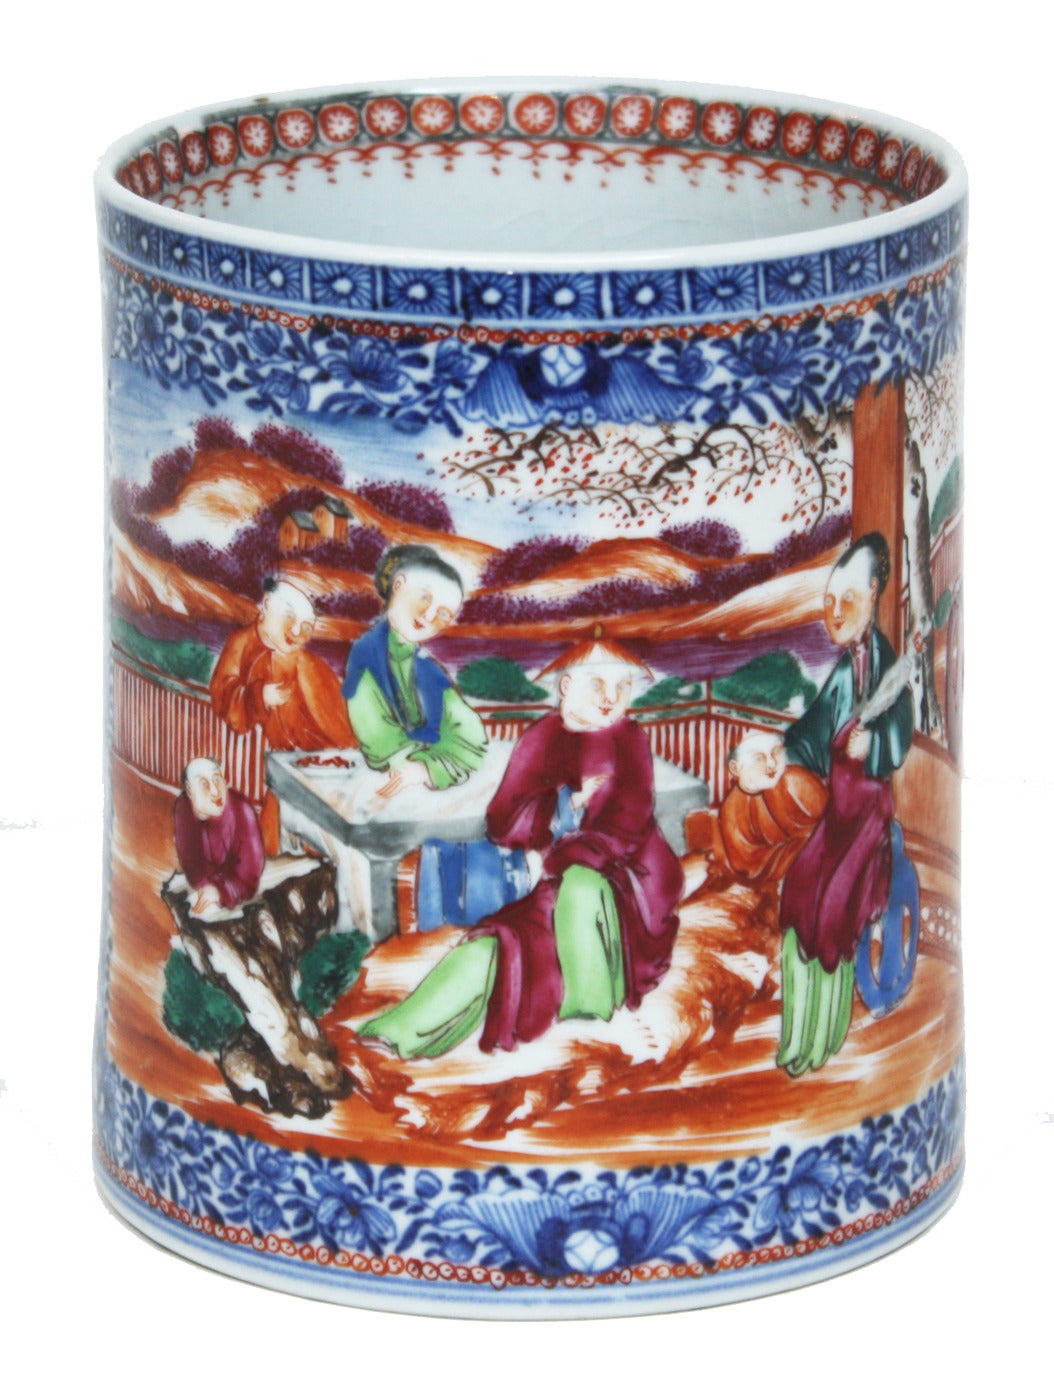 A very large Chinese export tankard painted in the mandarin palette with Chinese figures within underglazed blue and colored panels. Vibrant mandarin colors in blues, pinks, and greens. Additional color on the inside rim. Molded dragon handle with